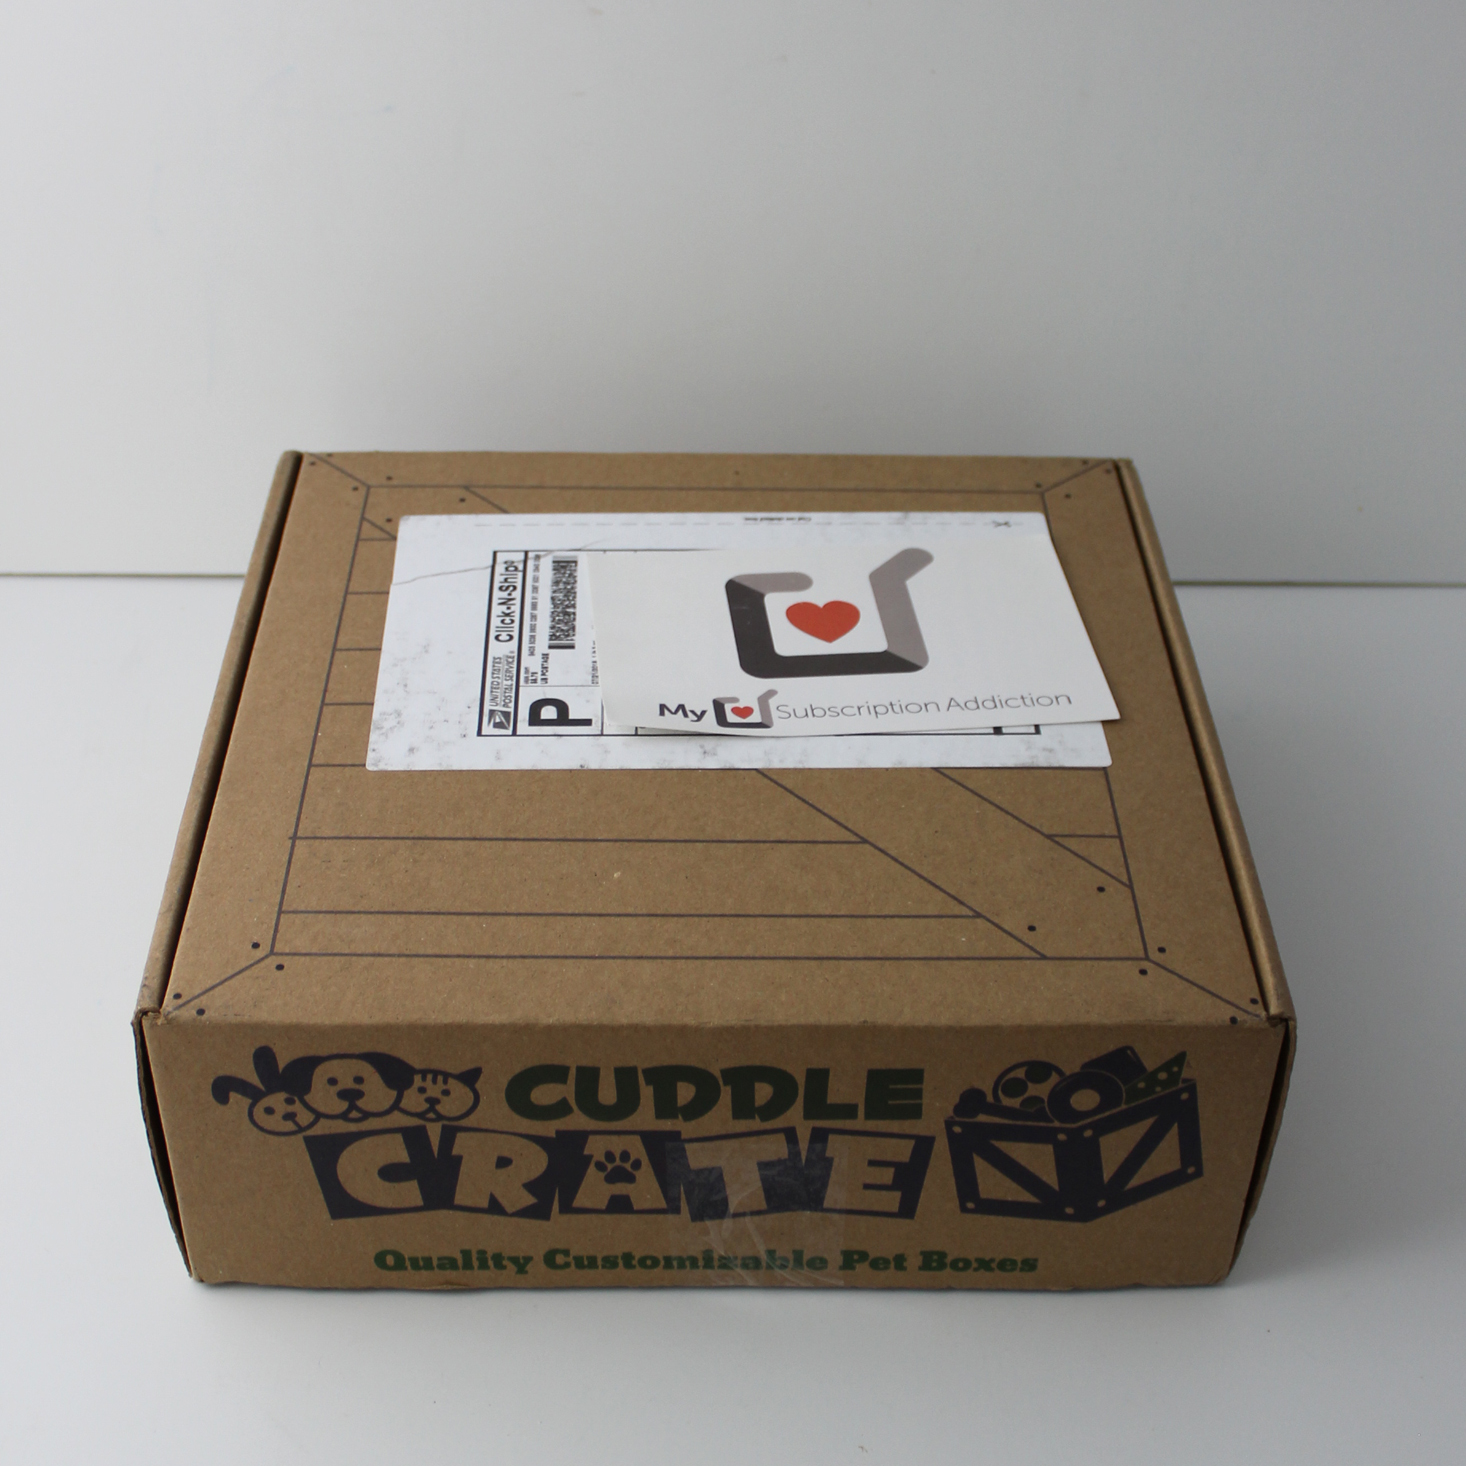 Cuddle Crate Cat Box Review + Coupon – July 2018